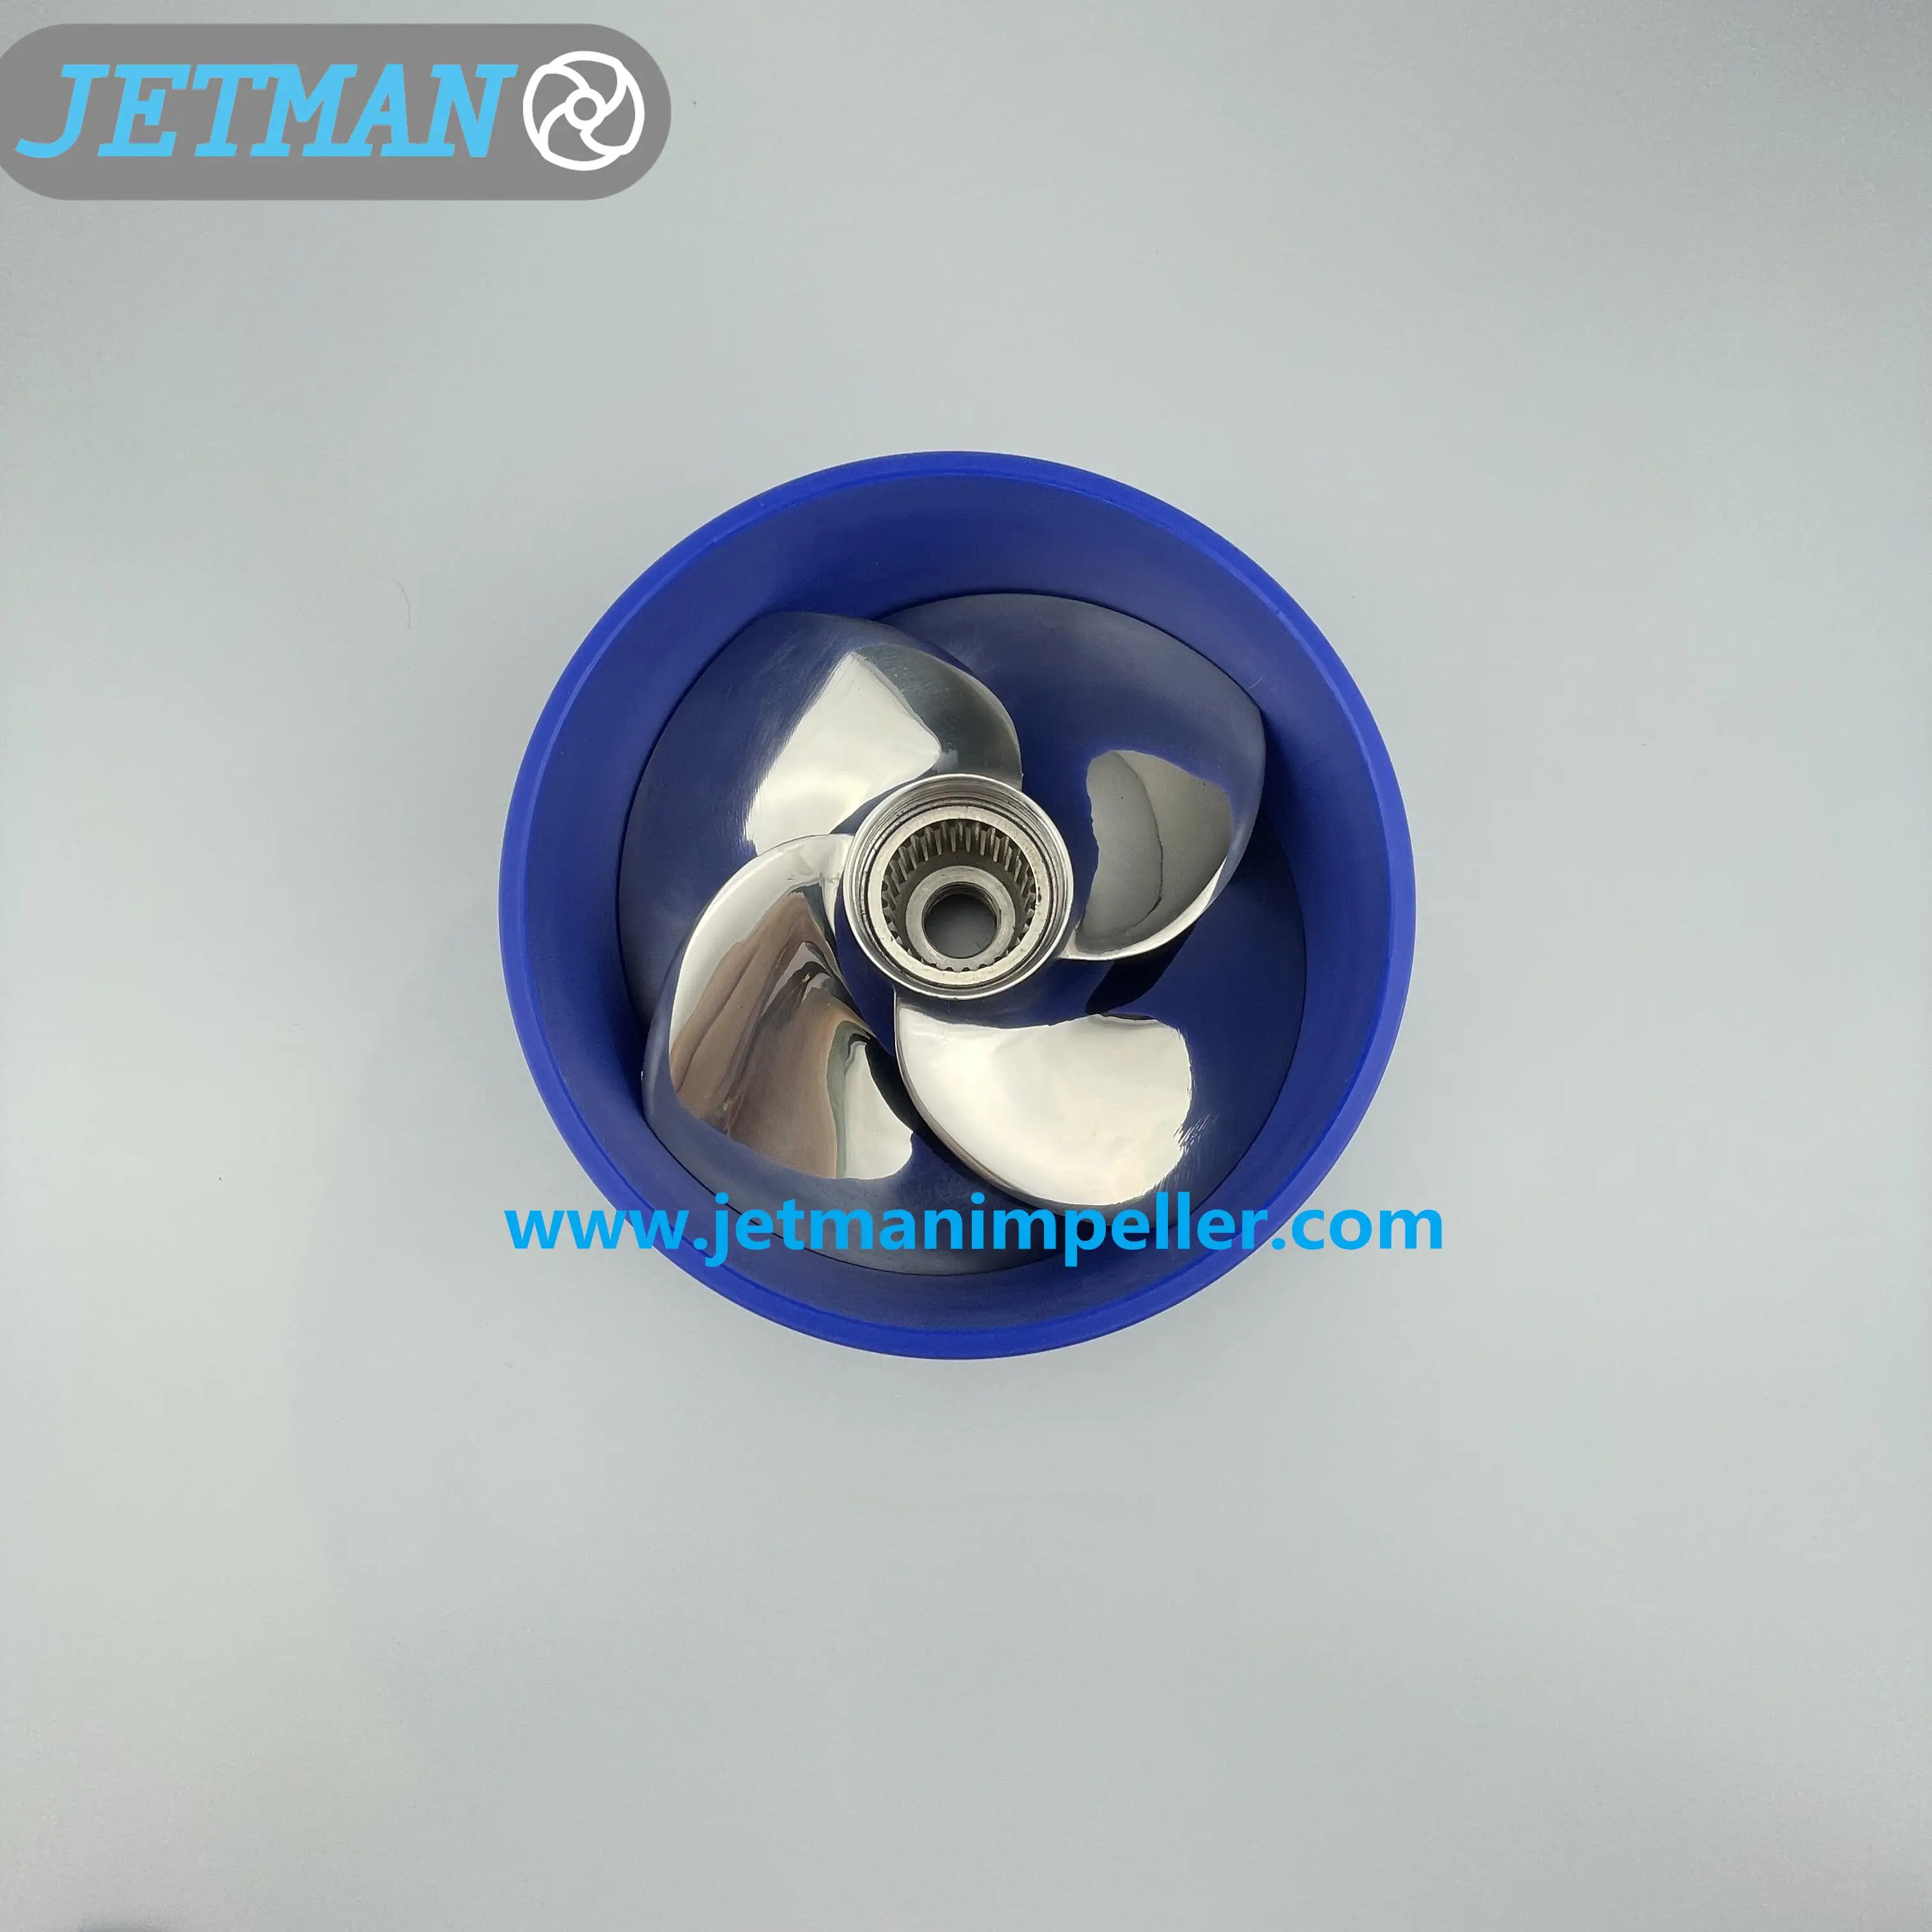 Factory wholesale Jetman Impeller fit for SeaDoo SX4-CD-13/16  161MM  4 Blades  RXP-X 300  / RXT-X 300 / GTX LIMITED 300